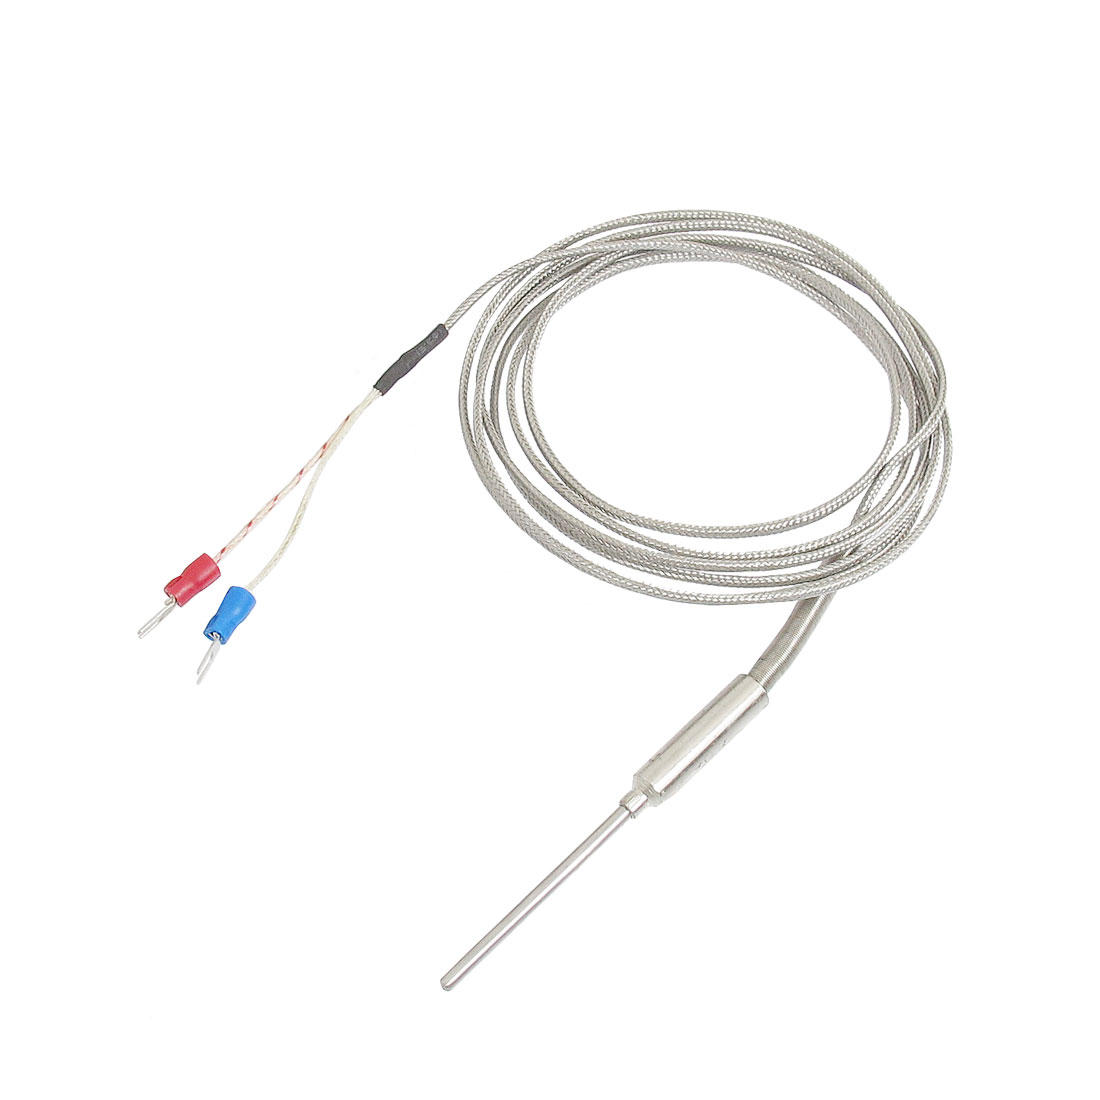 Unique Bargains Liquid Measuring 50mm x 3mm K Type Earth Thermocouple Probe 2 Meters